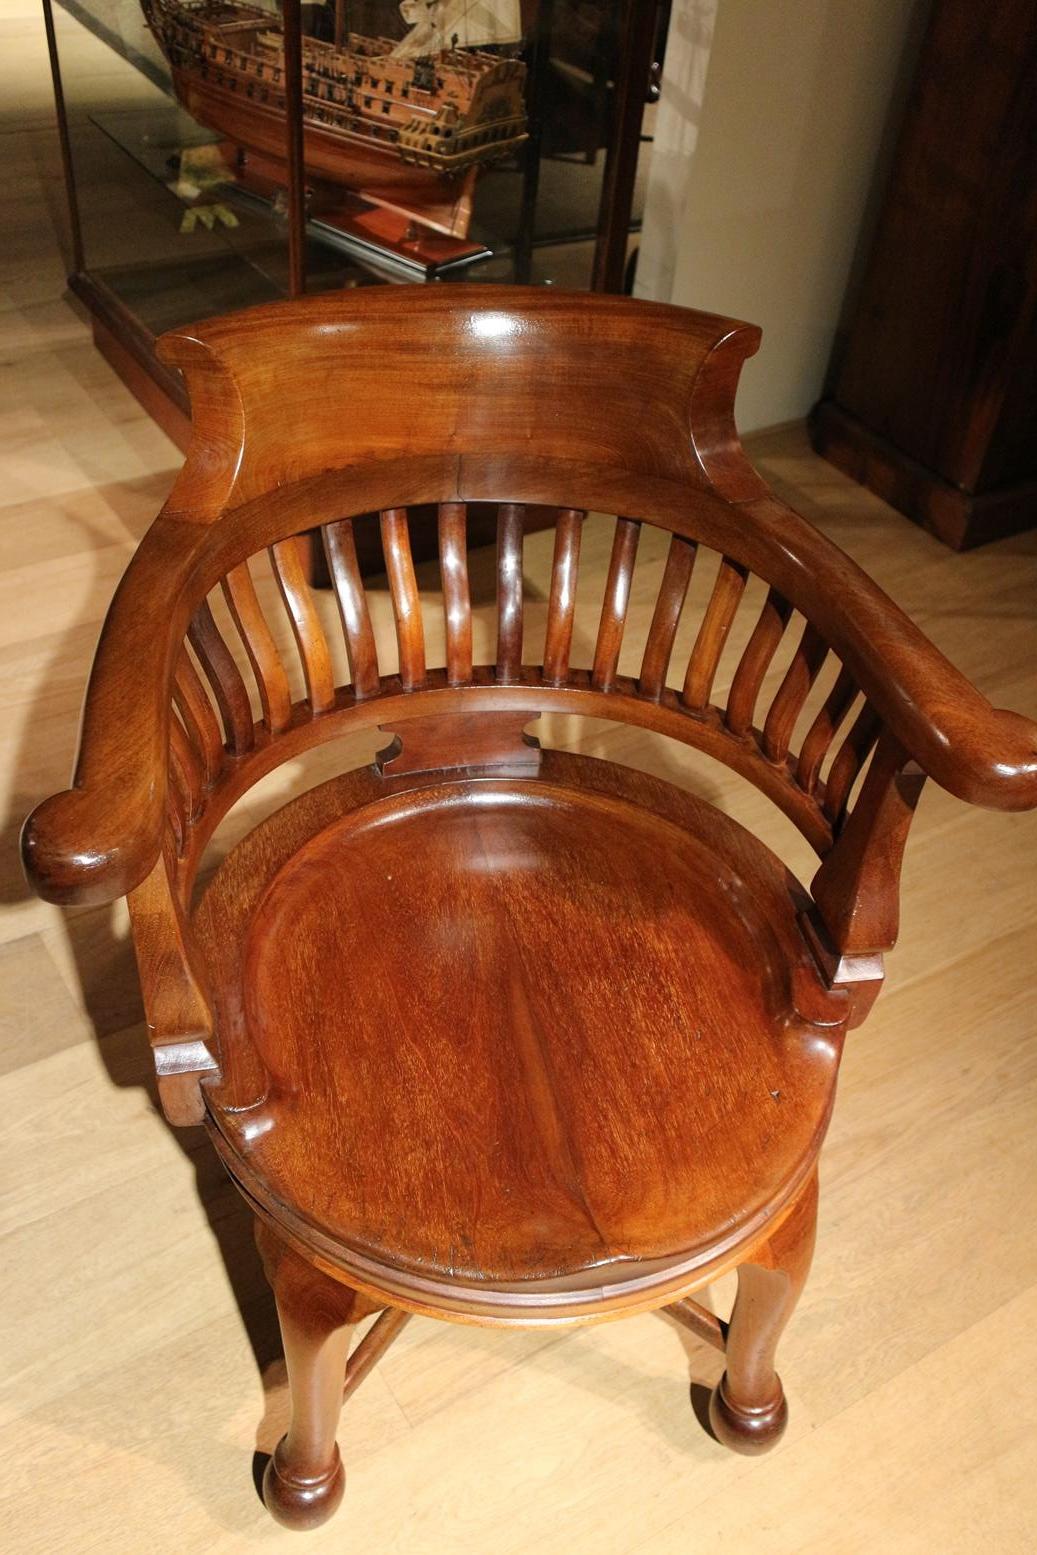 Impressive antique mahogany office chair in perfect condition. Top is rotatable. Chair is on porcelain wheels
Origin: England
Period of time: circa 1880
Size: br.68cm, D 60cm, H 86cm.